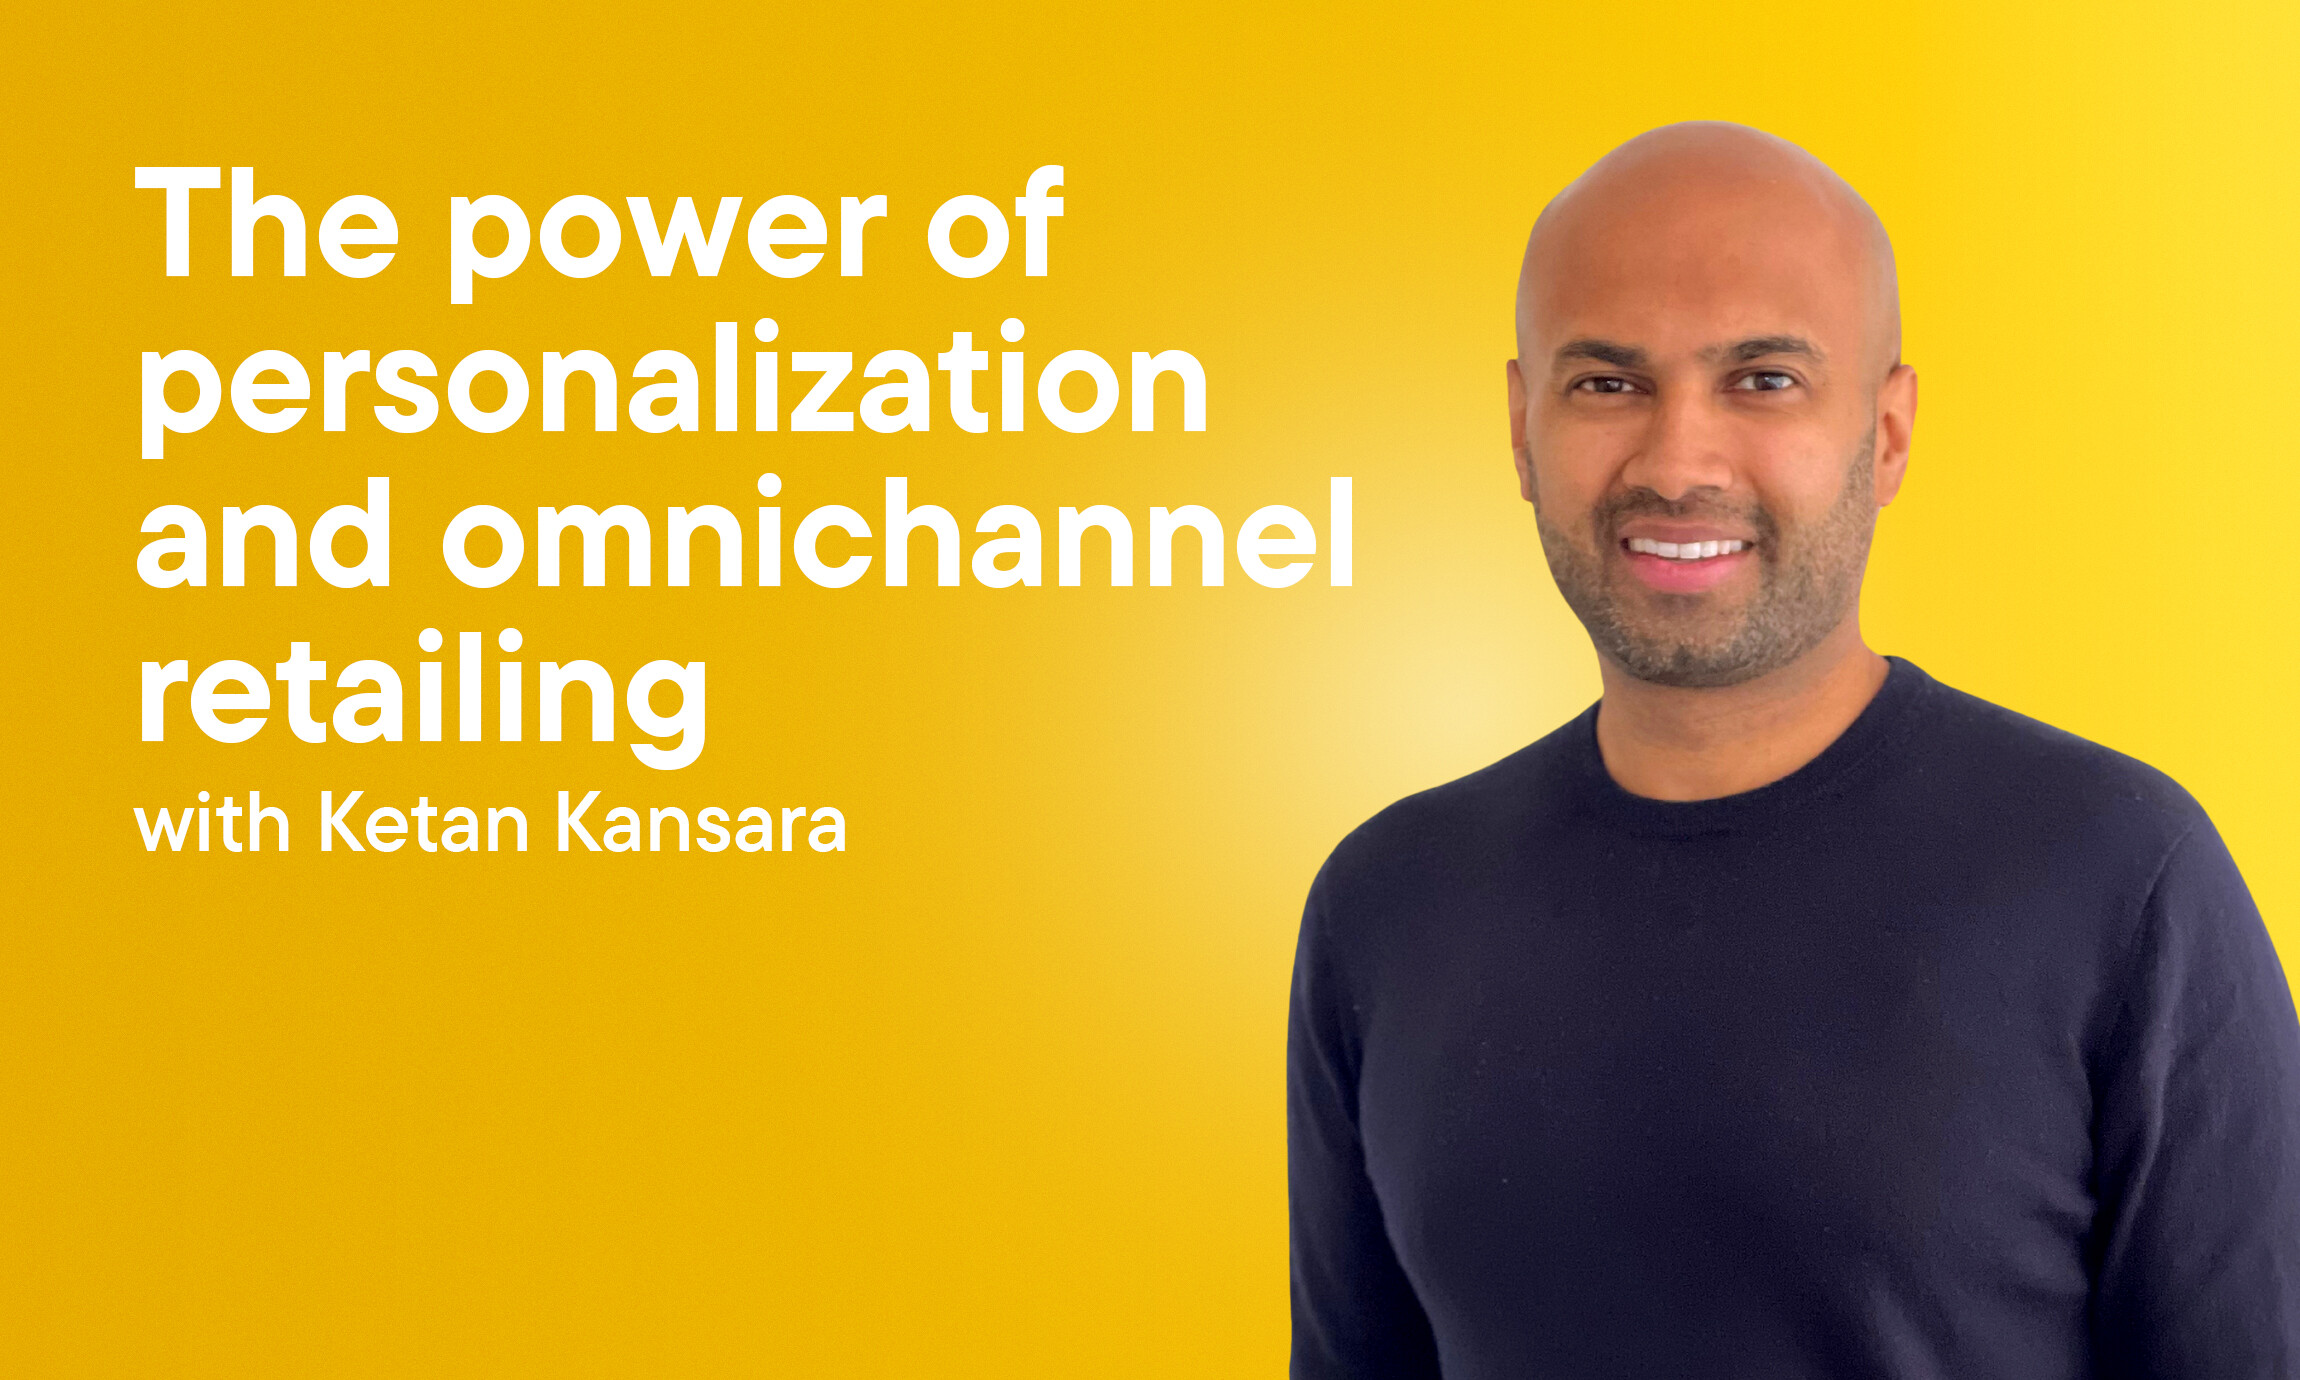 The power of personalization and omnichannel retailing with Ketan Kansara